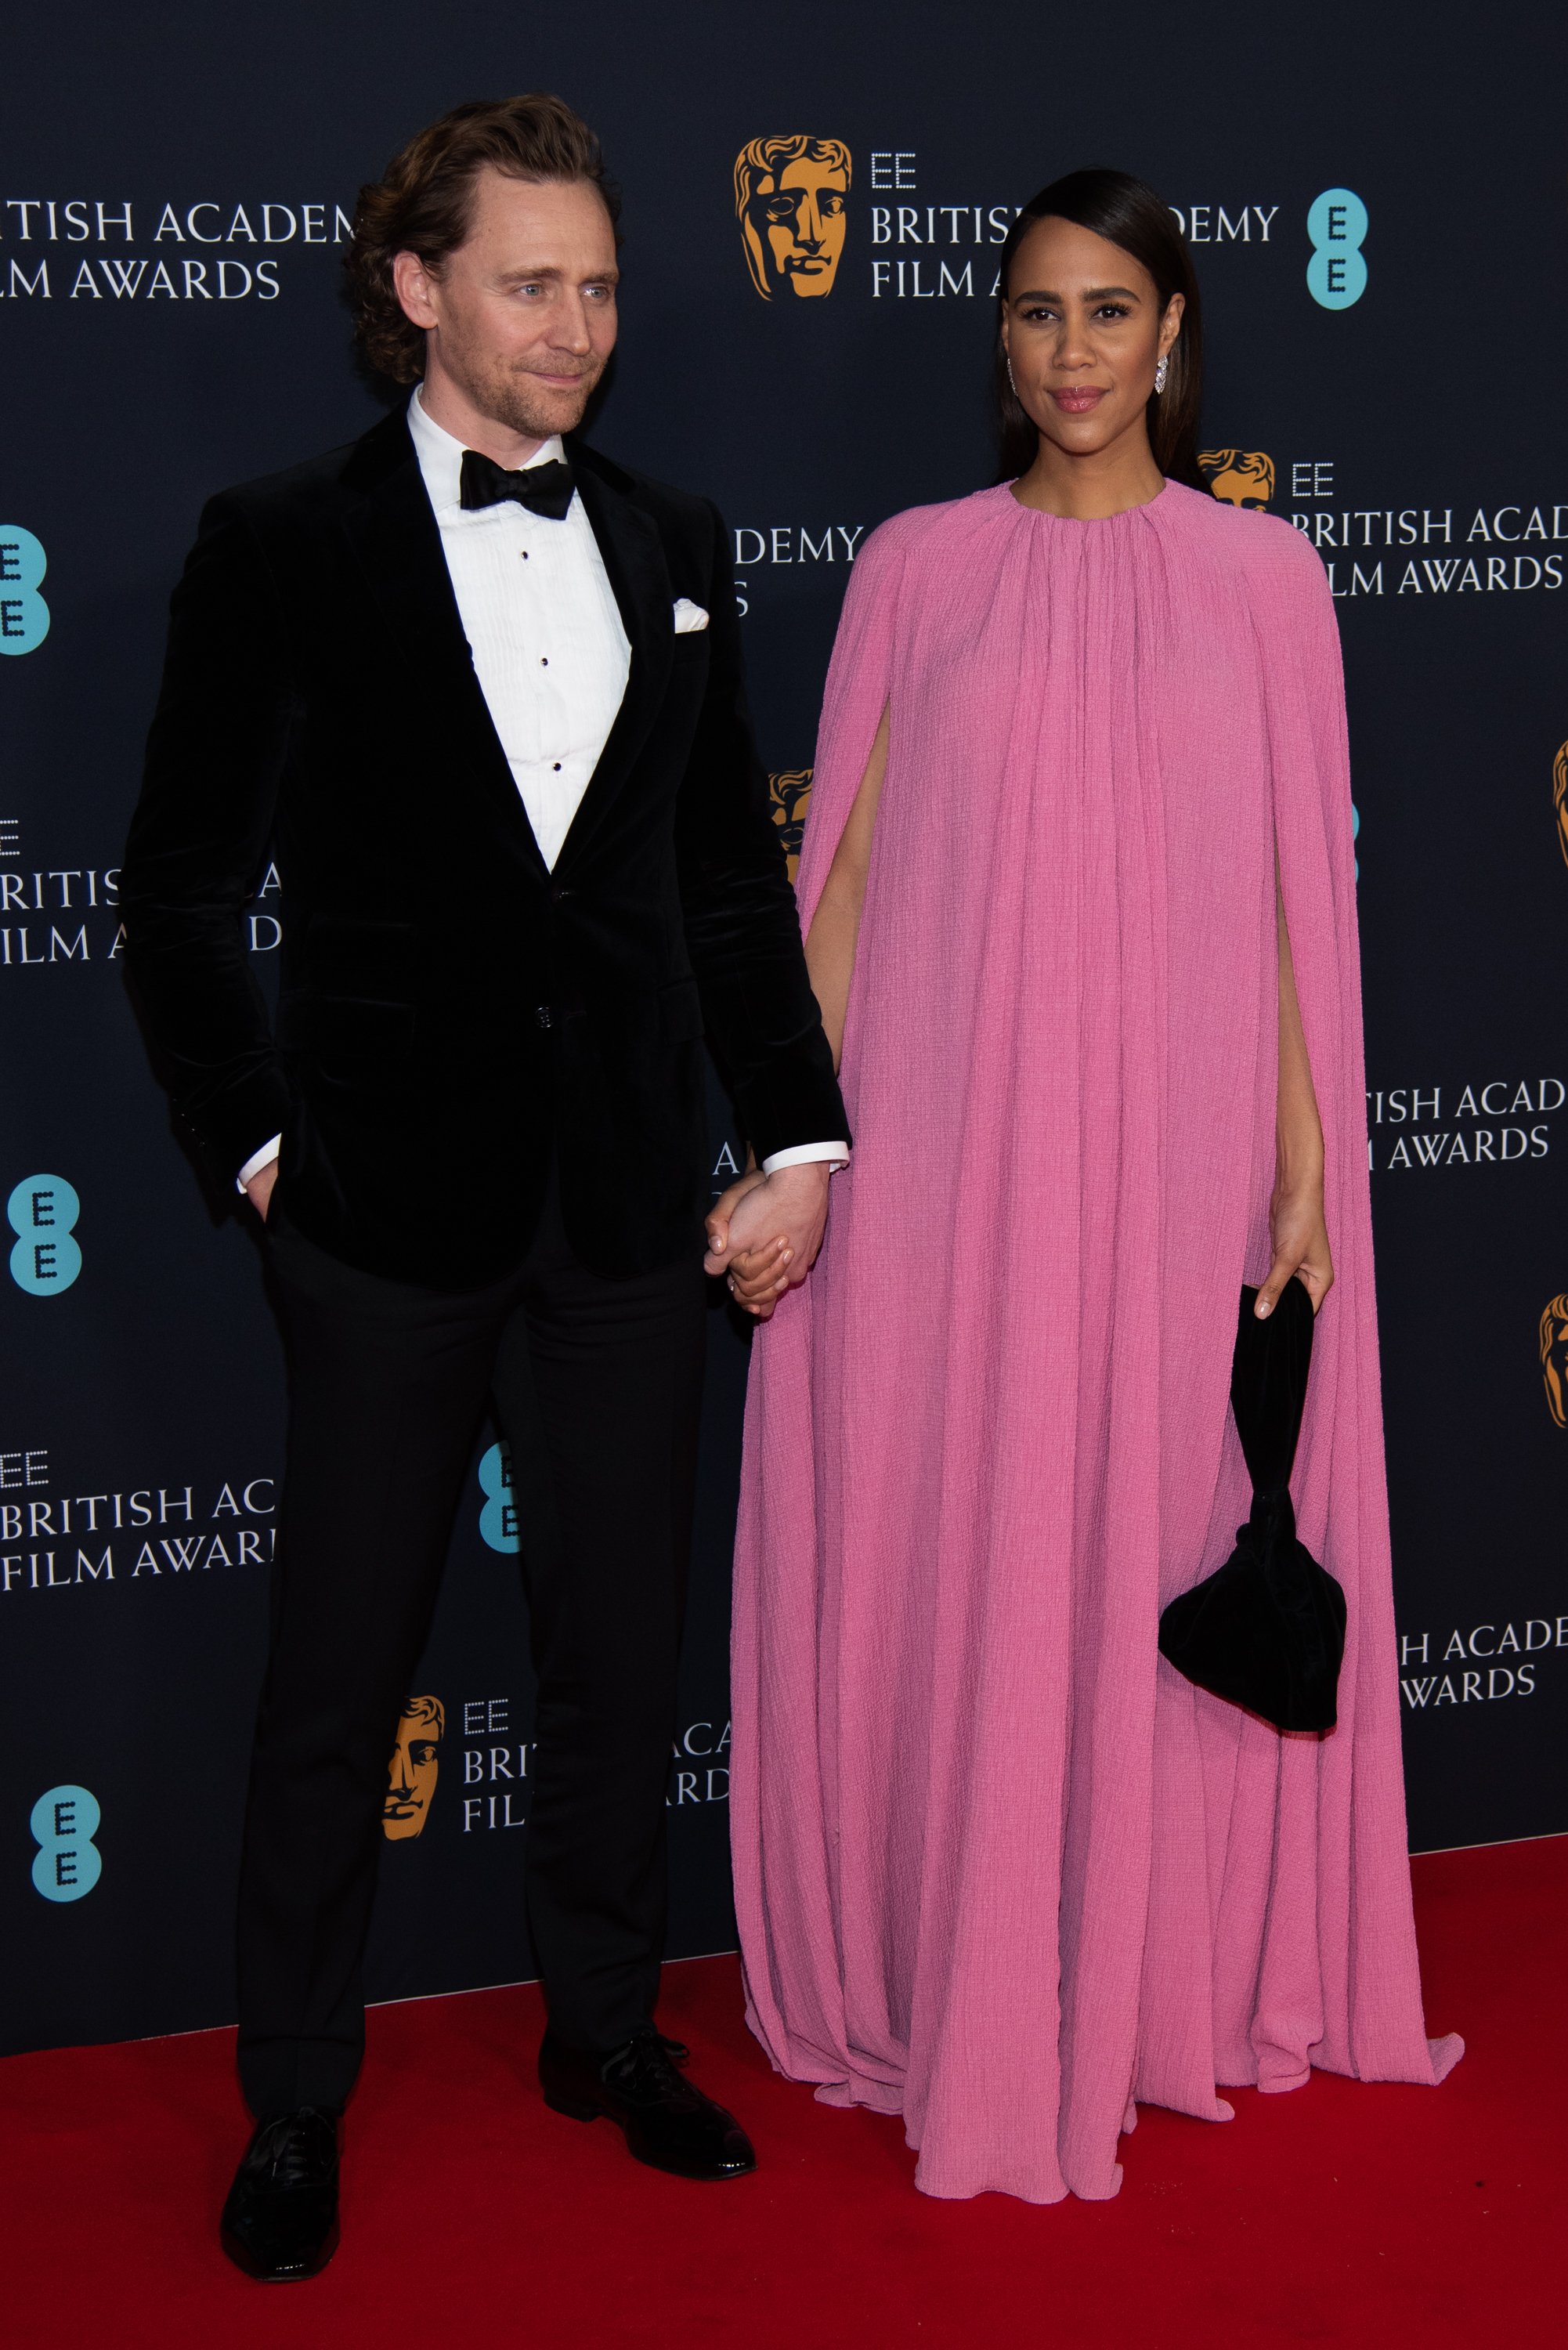  Tom Hiddleston and Zawe Ashton during the EE British Academy Film Awards 2022 dinner red carpet arrivals in London, England on March 13, 2022. | Source: Getty Images